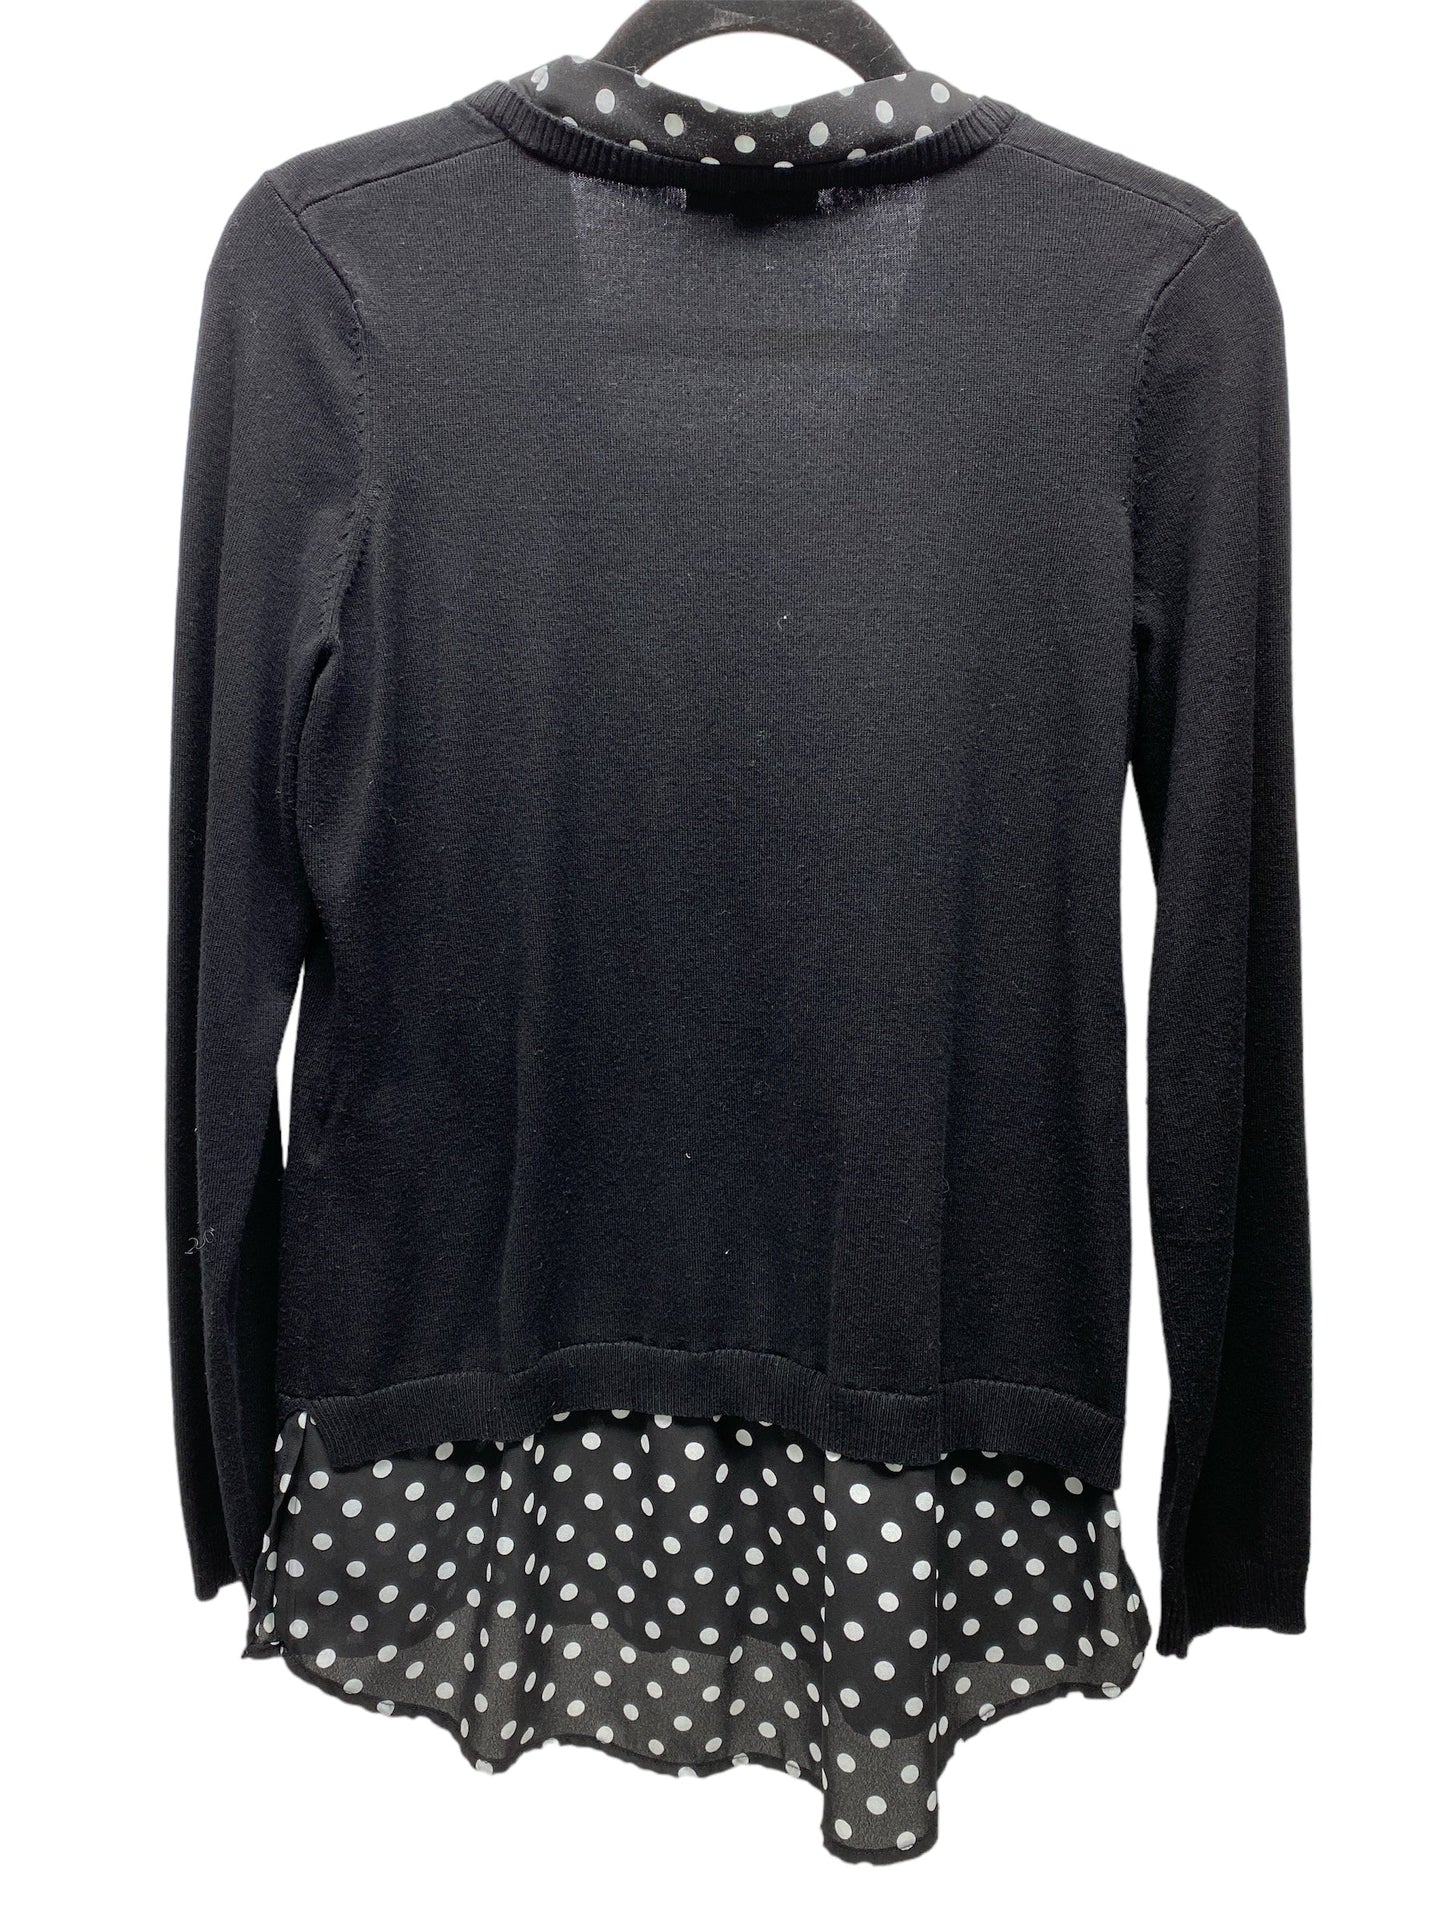 Sweater By Adrianna Papell  Size: M